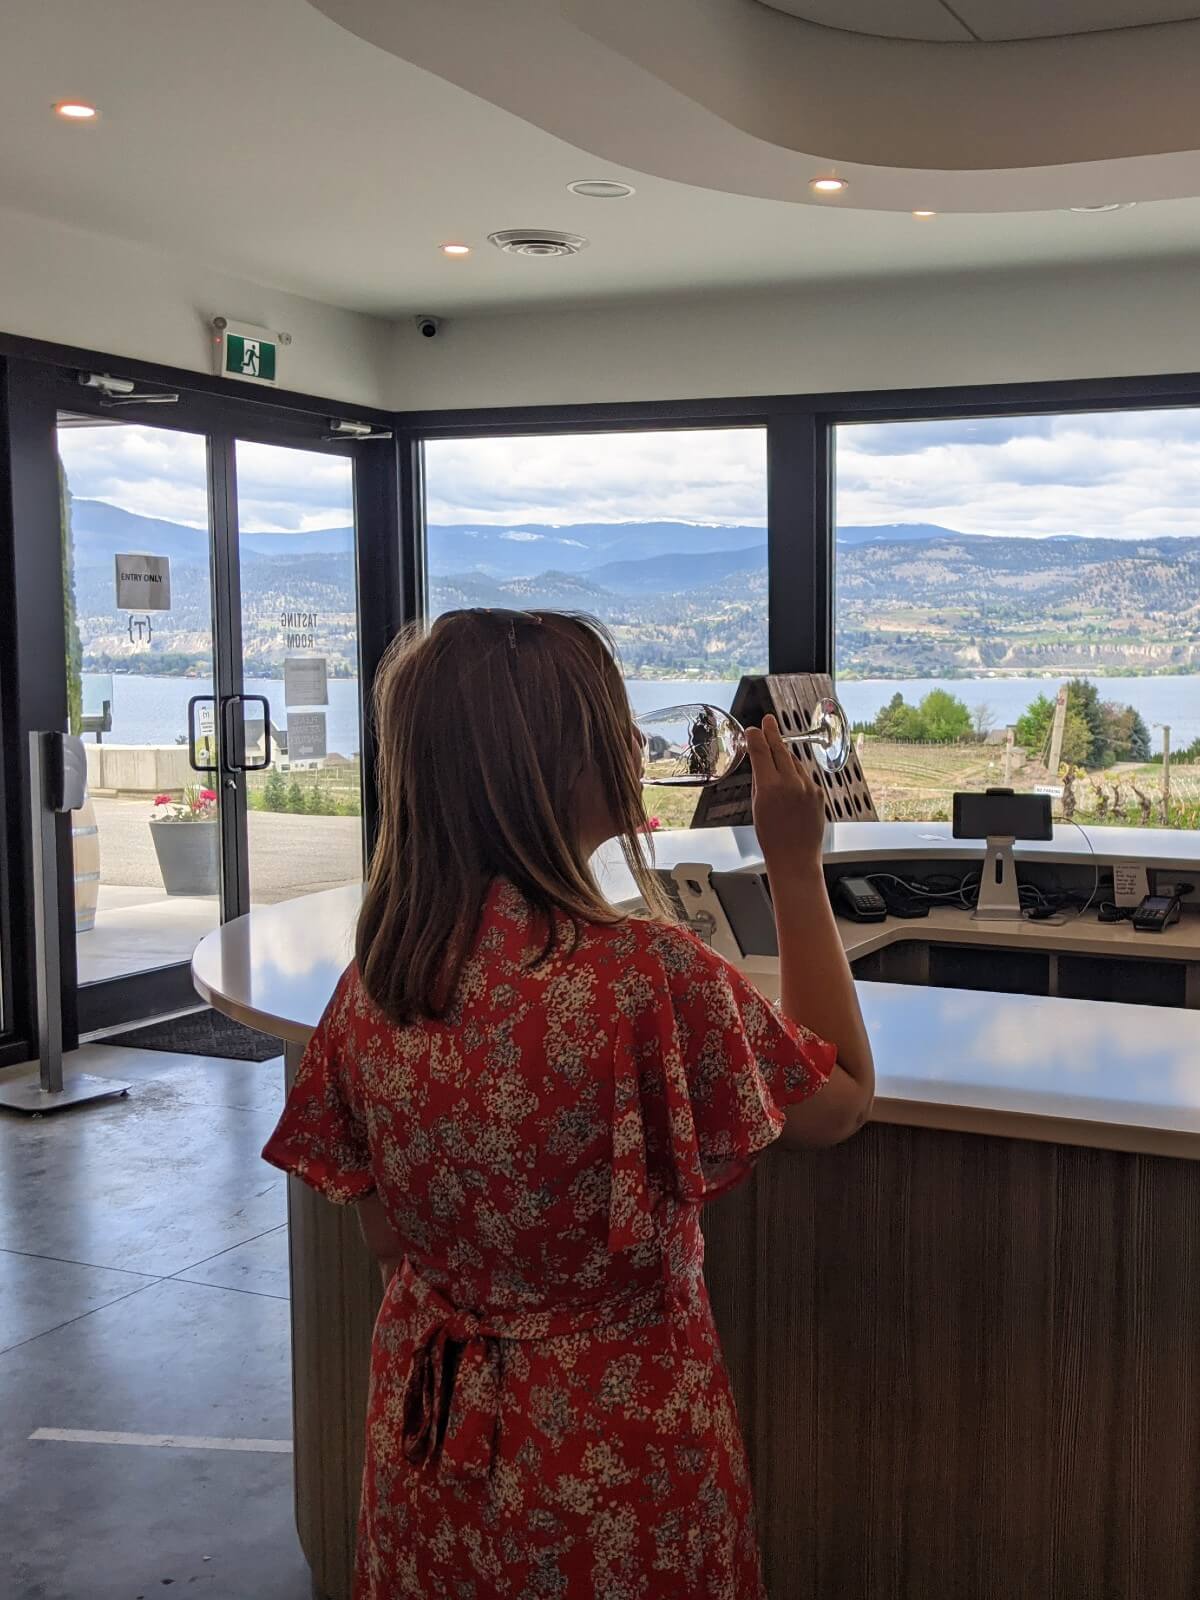 Back view of woman in red dress sipping wine from wine glass at tasting bar, with views of Okanagan Lake visible through floor to ceiling windows behind